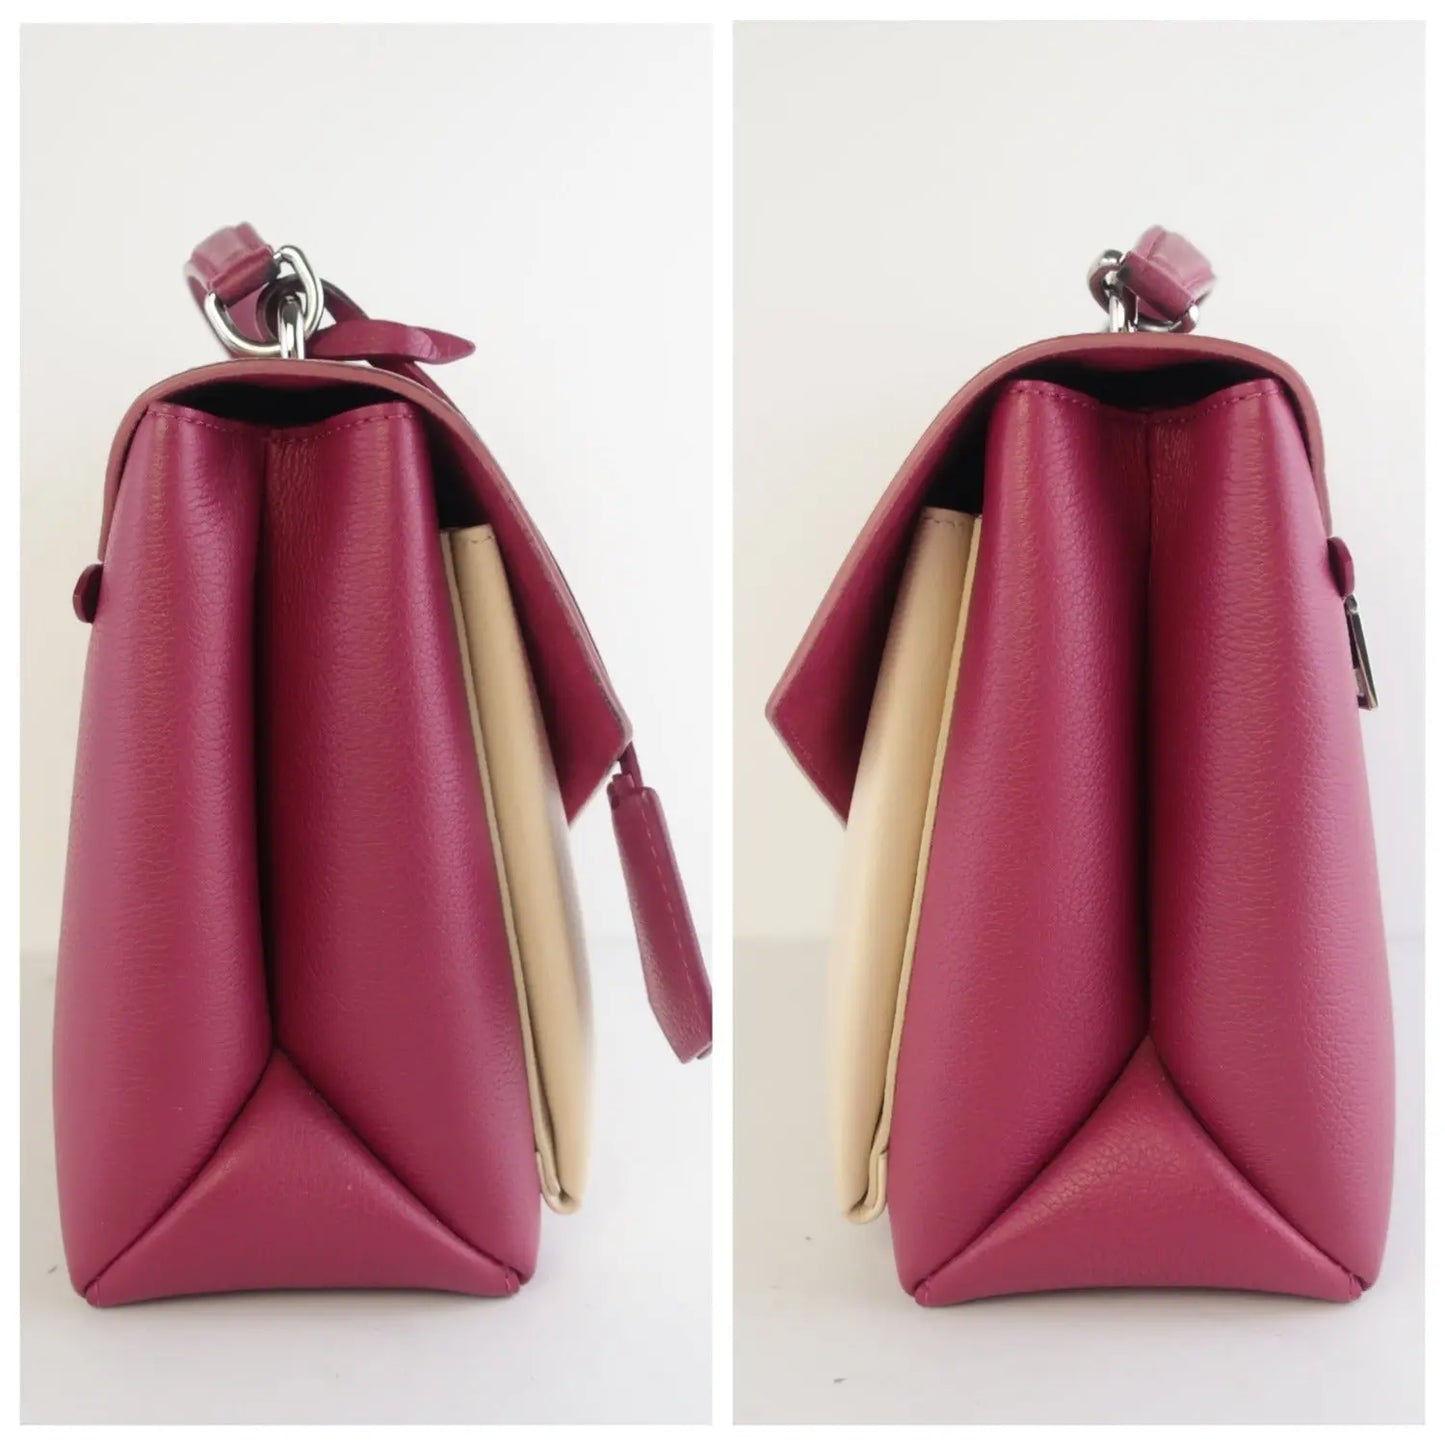 Load image into Gallery viewer, Louis Vuitton Louis Vuitton Fuchsia/Pink Pebbled Leather Mylockme Bag LVBagaholic
